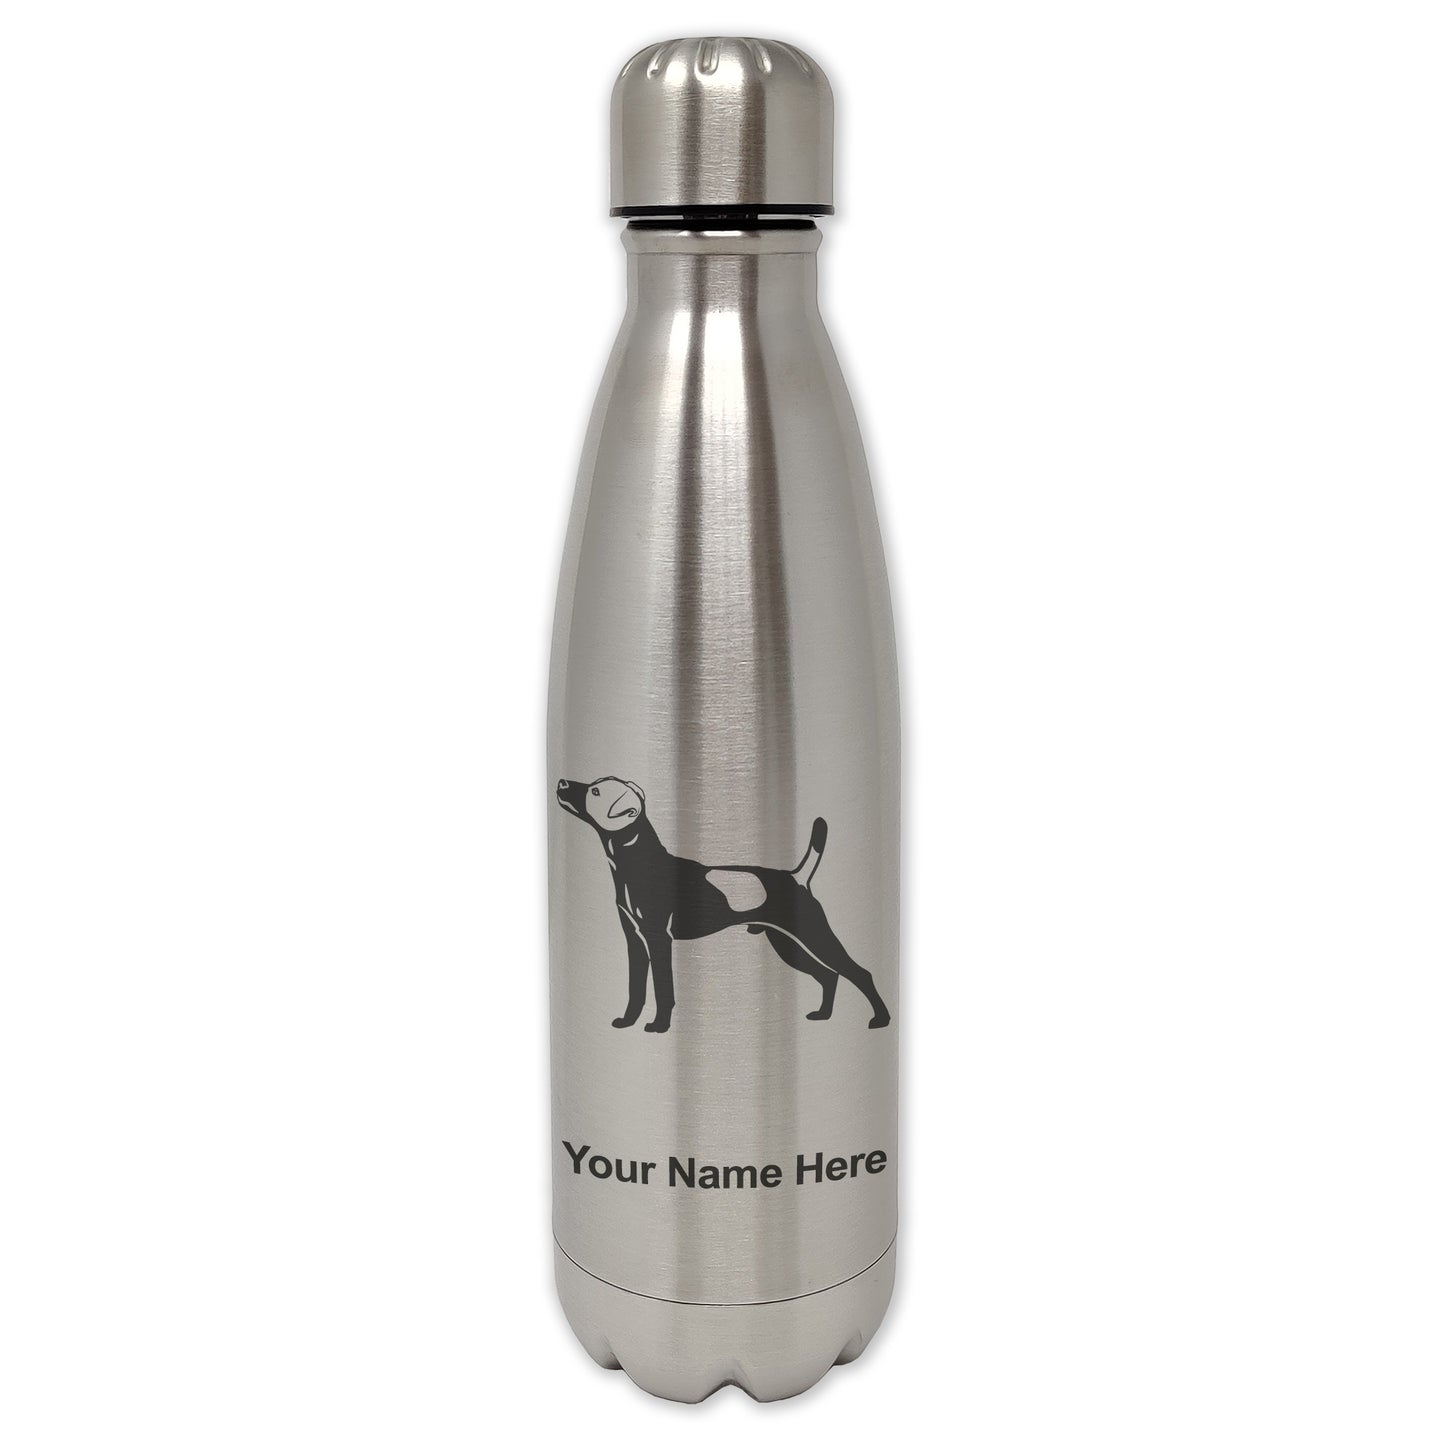 LaserGram Single Wall Water Bottle, Jack Russell Terrier Dog, Personalized Engraving Included